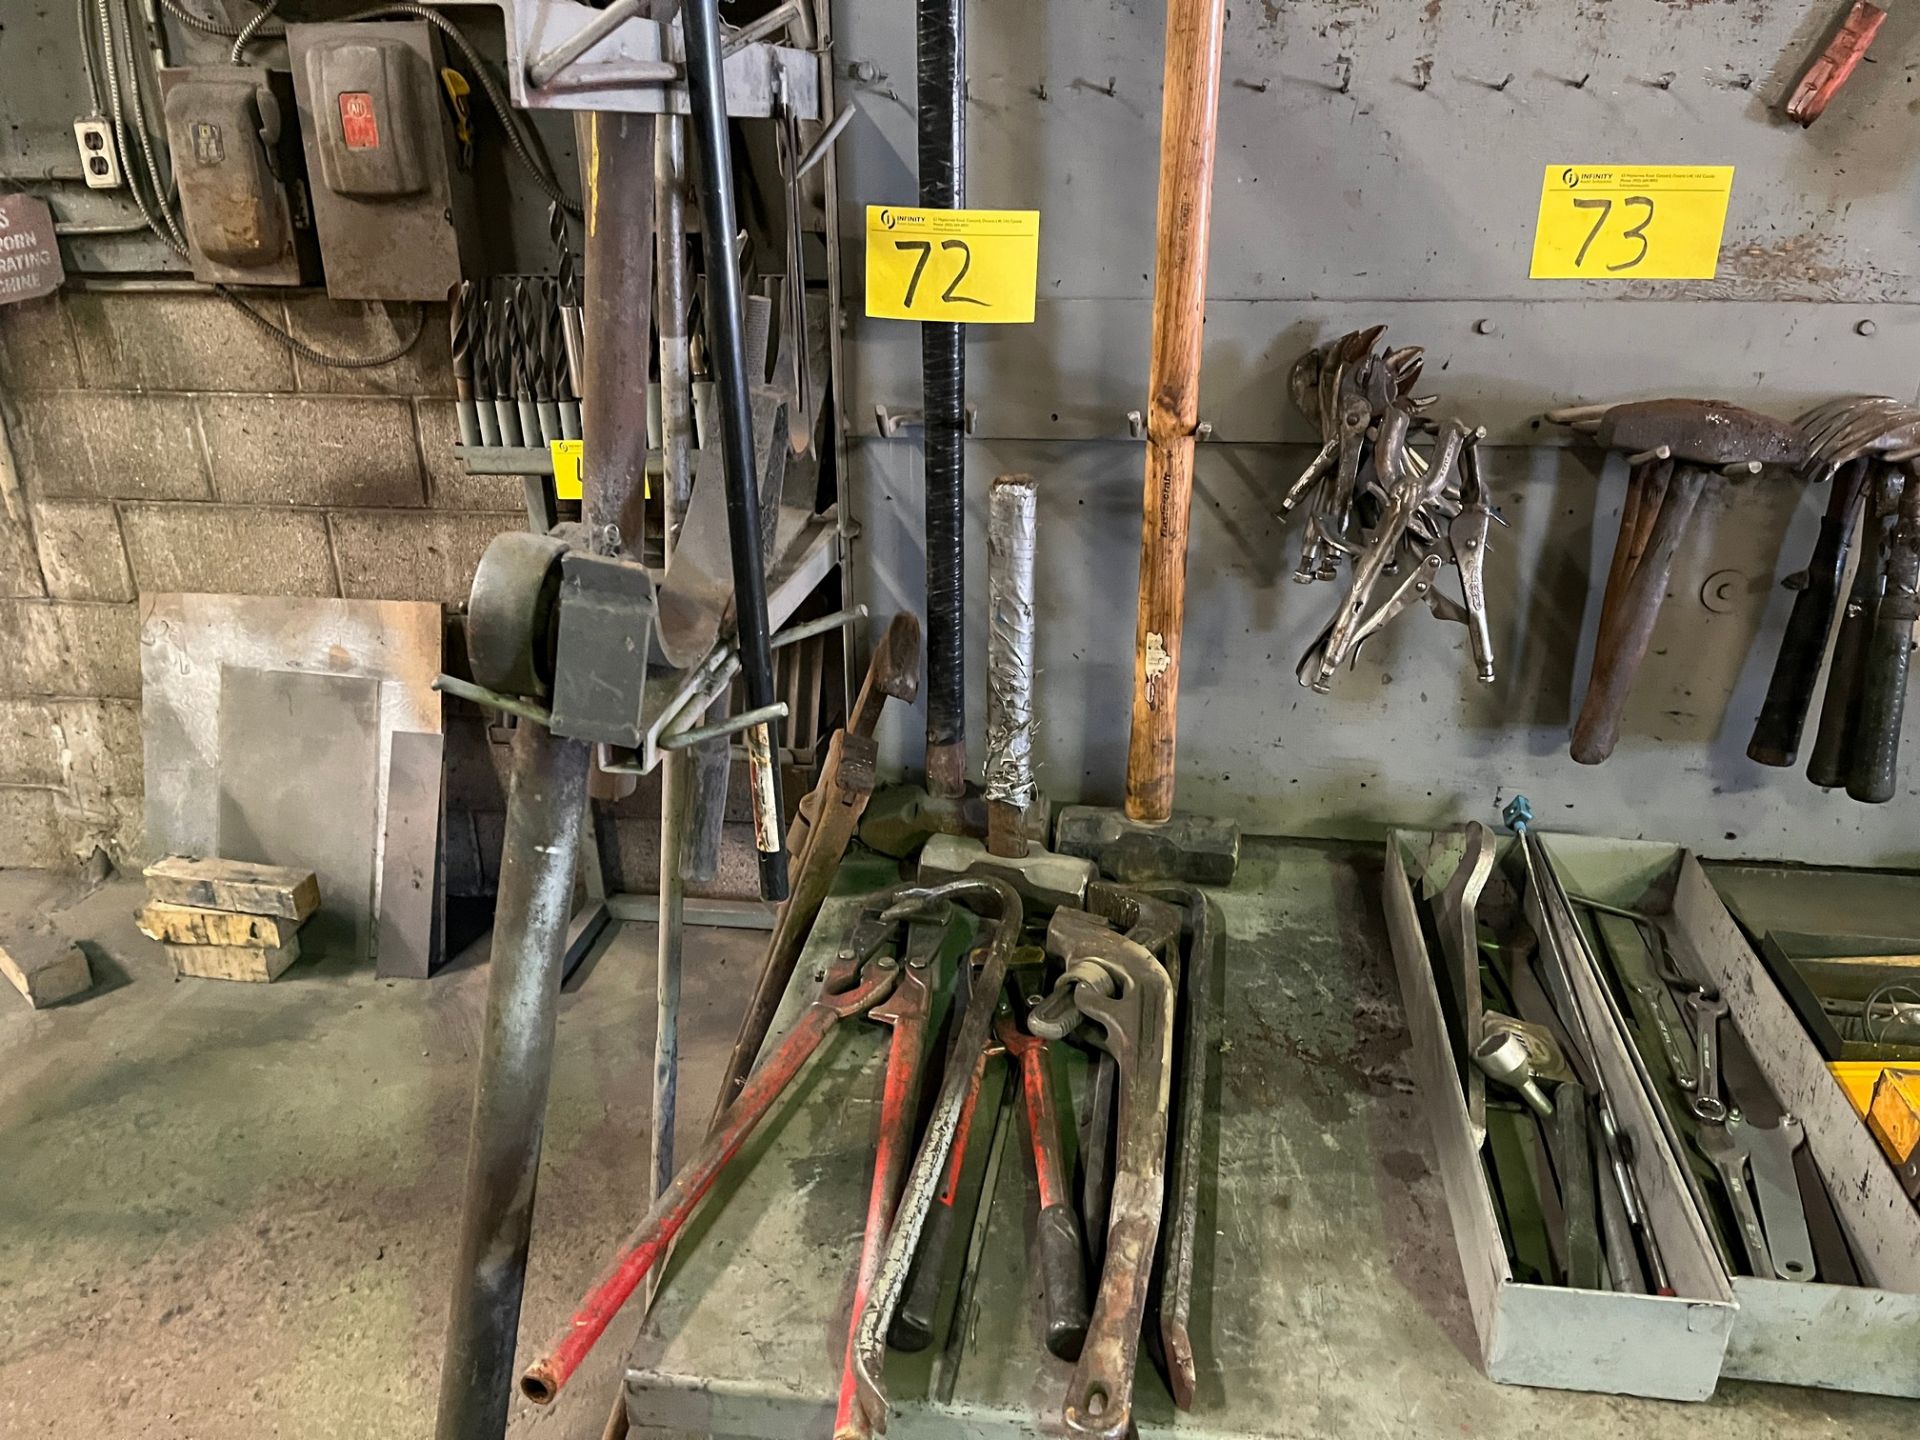 LOT OF LARGE HAND TOOLS, SLED HAMMER, BOLT CUTTERS, PIPE WRENCHES, ETC.